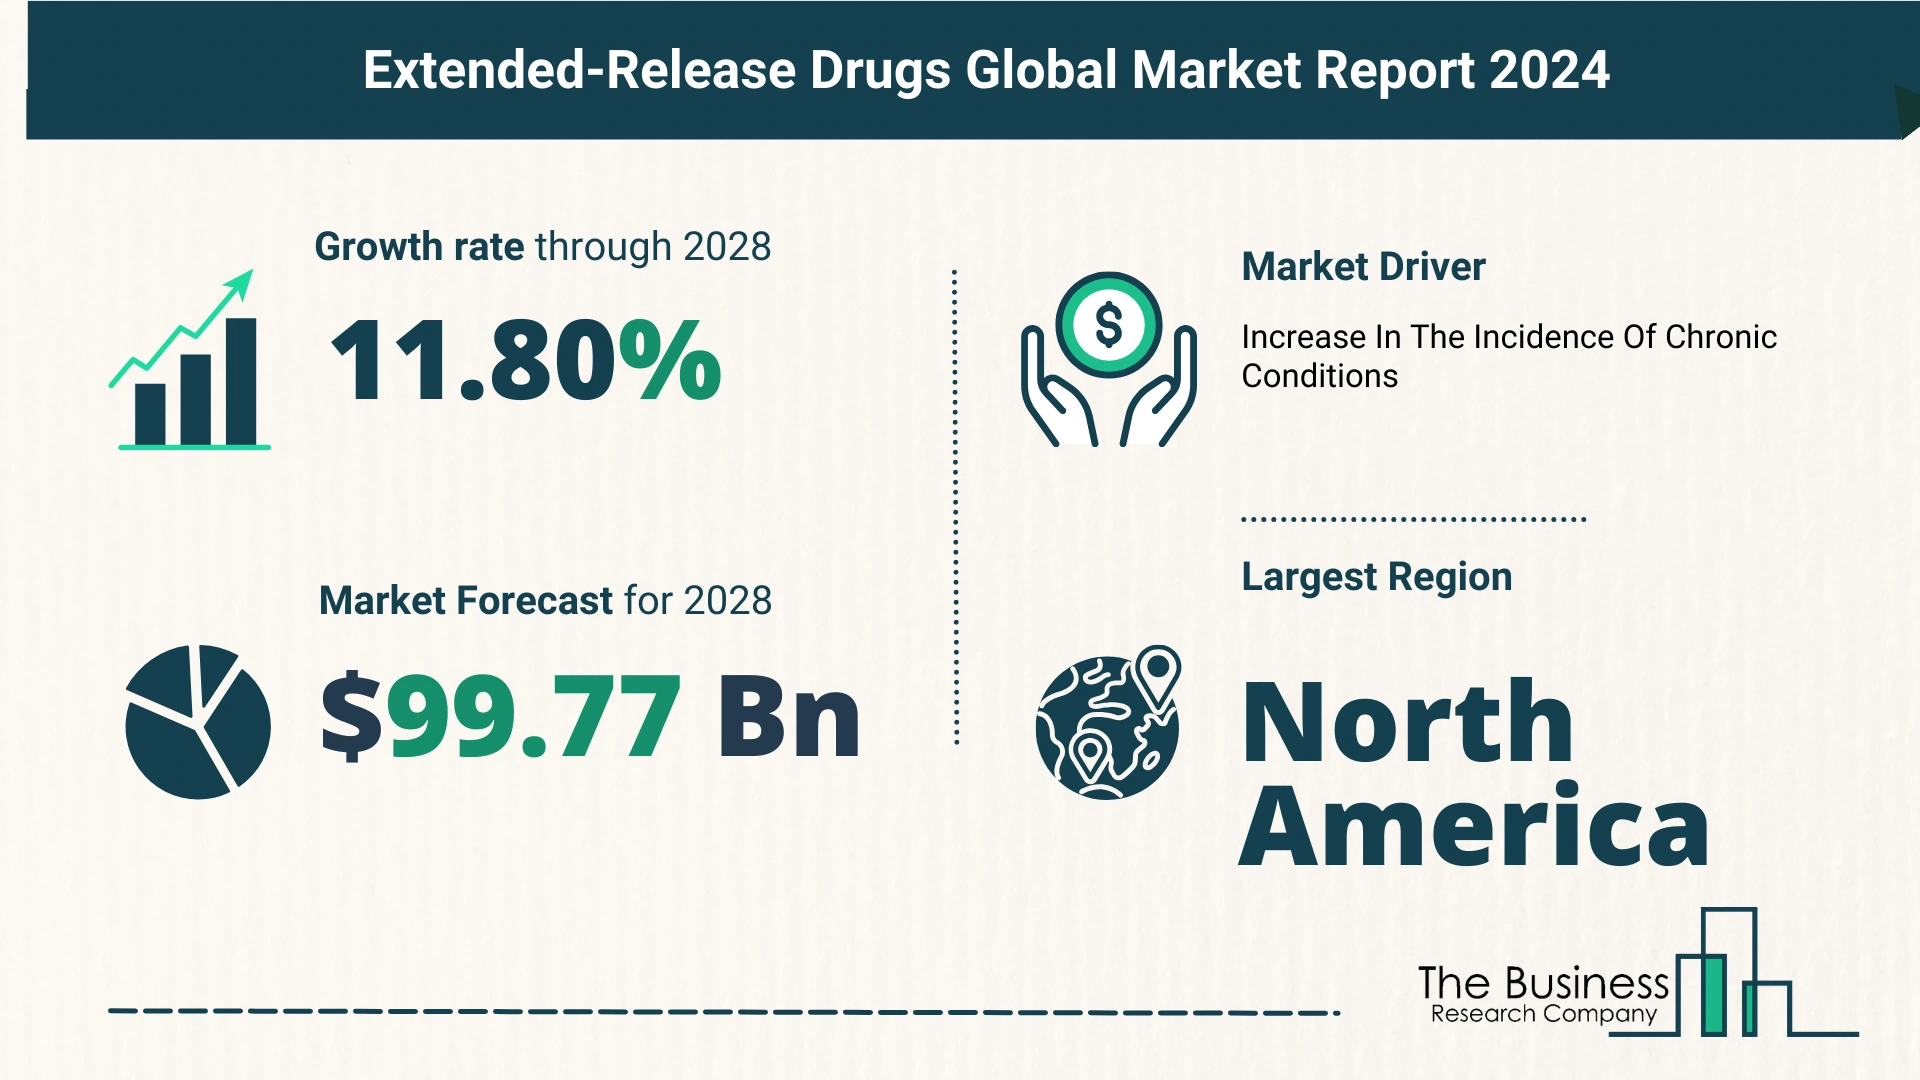 Global Extended-Release Drugs Market Size